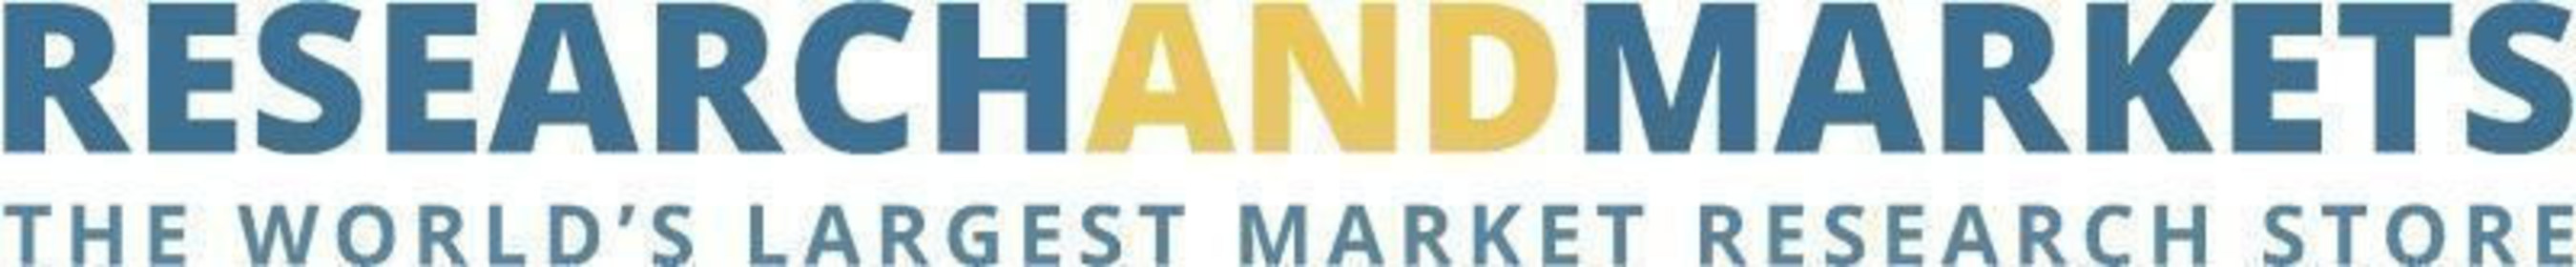 Reserach and Markets Logo